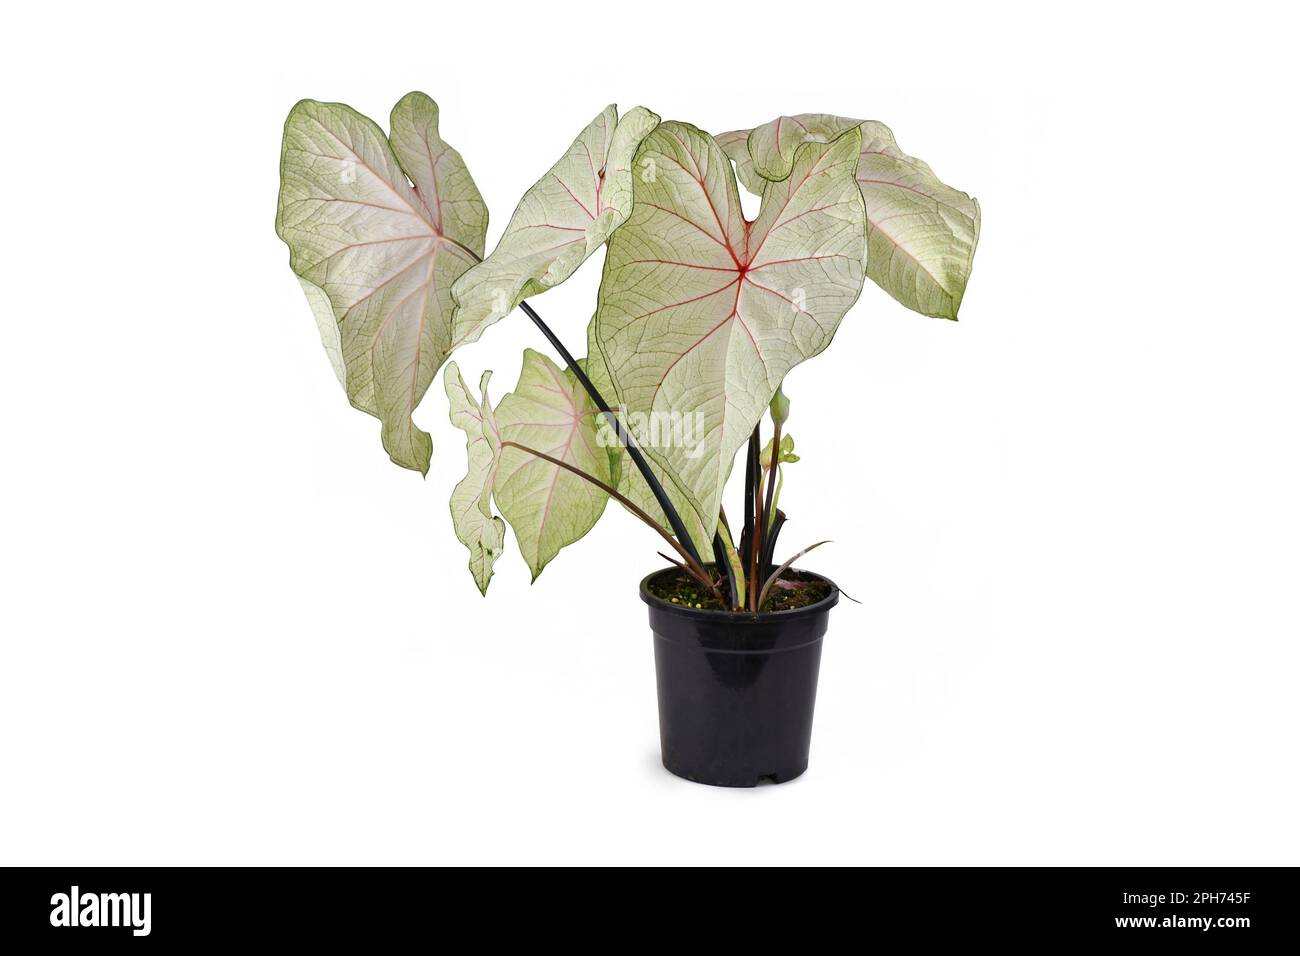 Exotic 'Caladium White Queen' houseplant with white leaves and pink veins in black flower pot Stock Photo